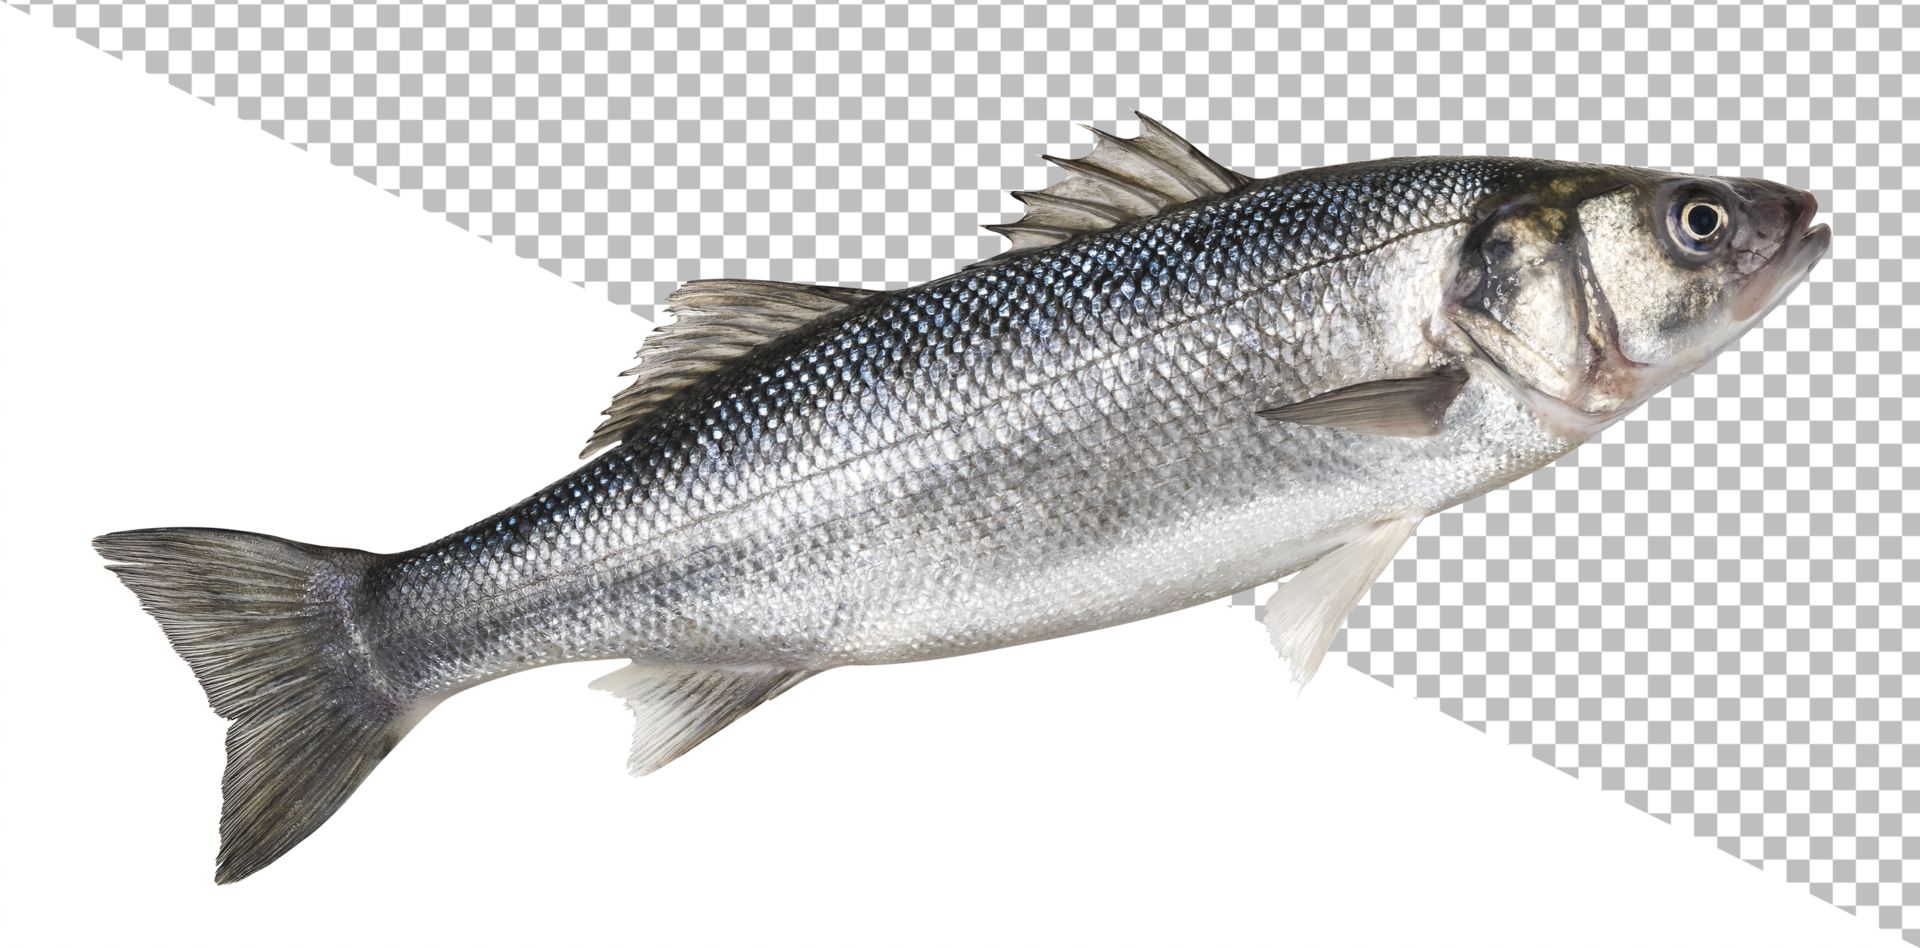 Sea bass, fresh seabass fish isolated on white background psd